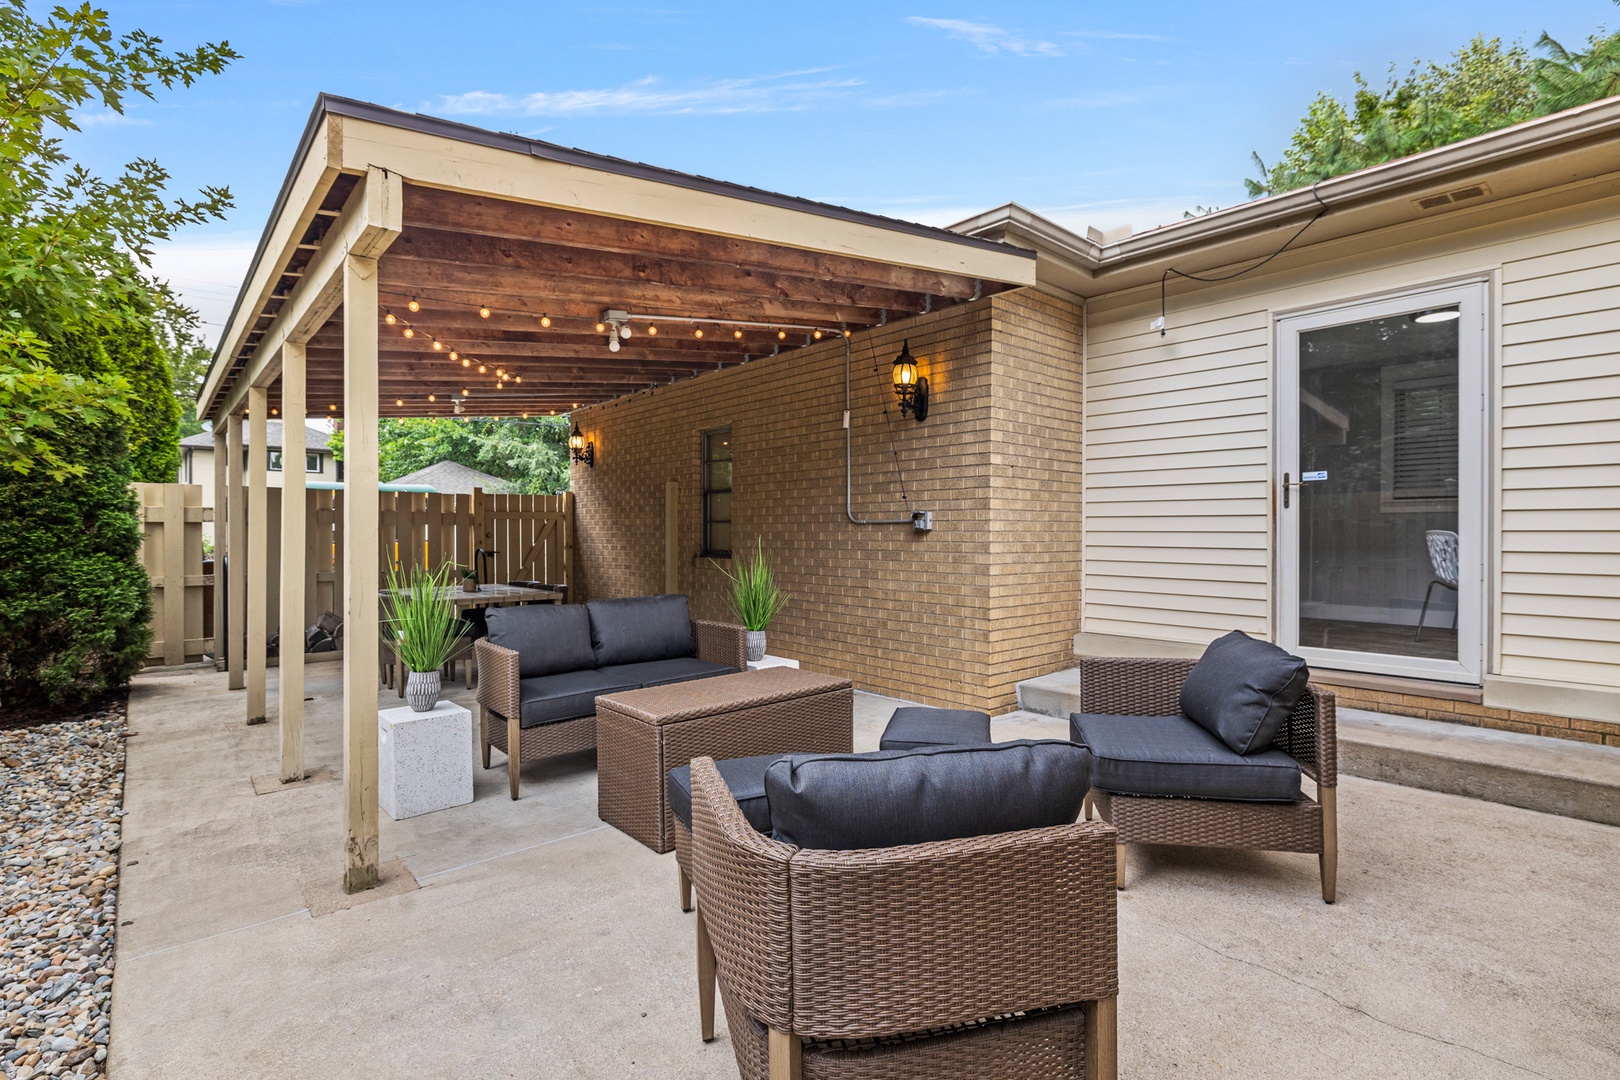 Enjoy a pre-game get together in the outdoor entertaining area.